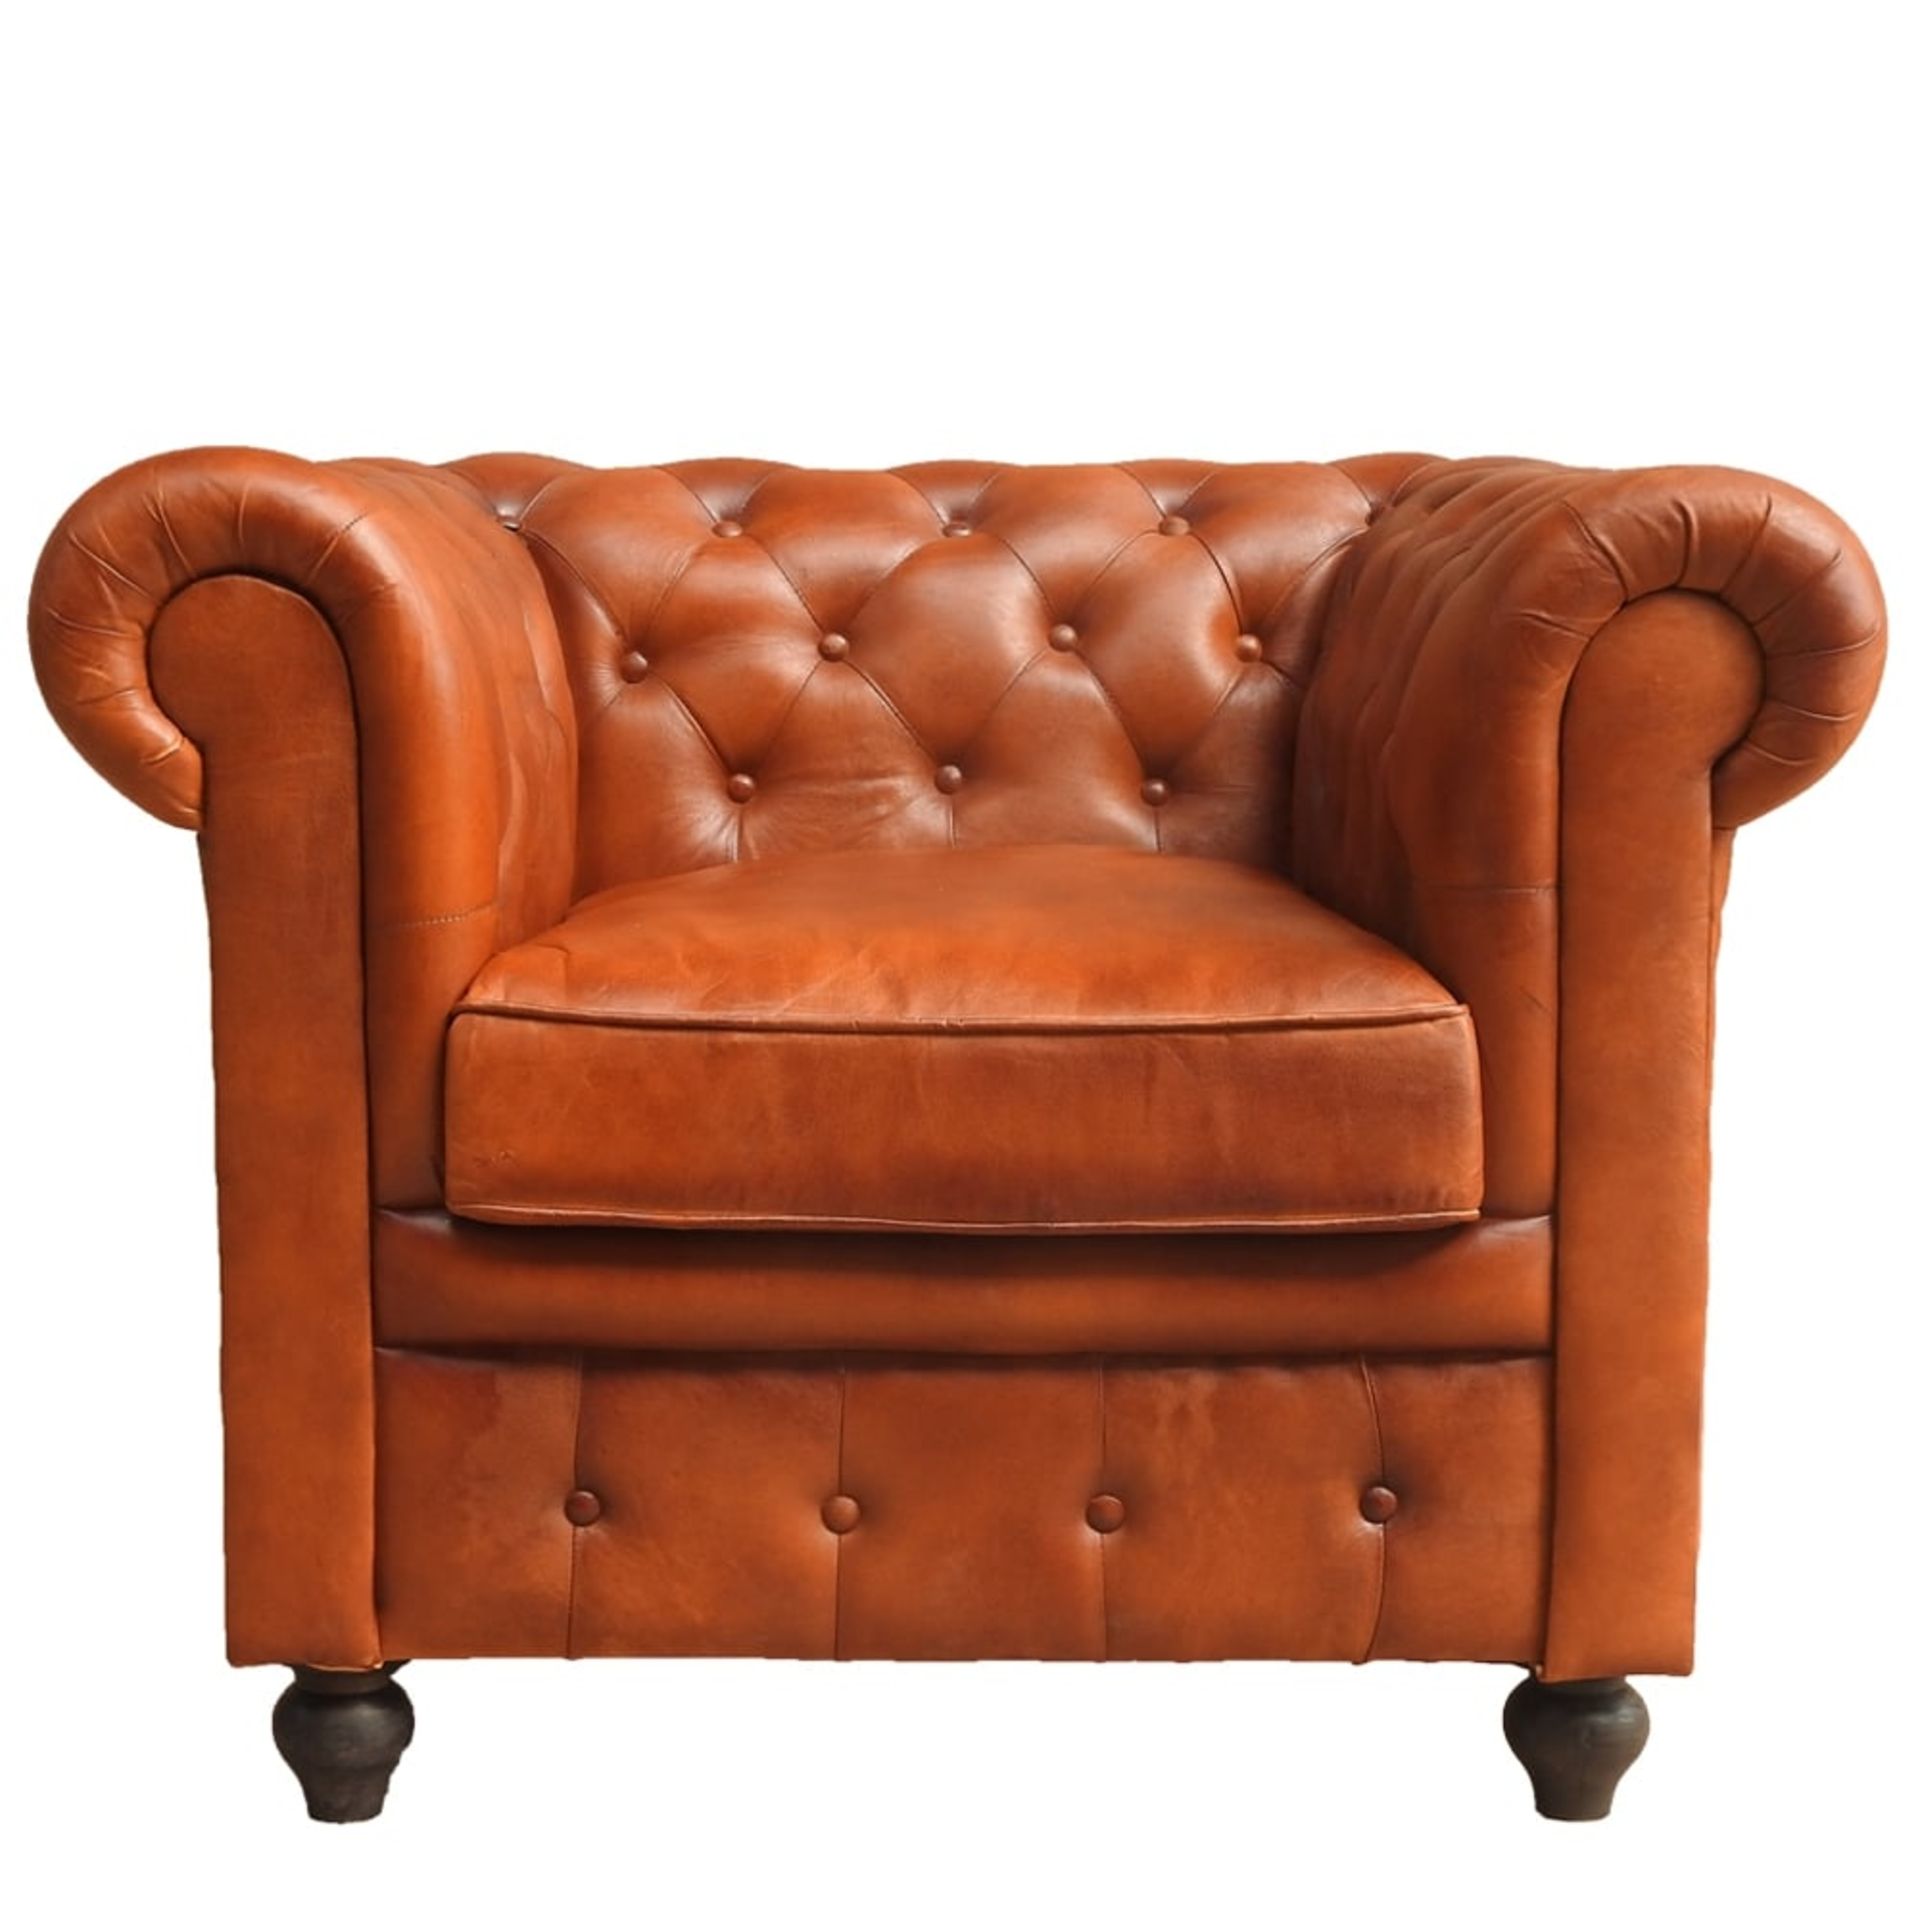 Shoreditch Low Back Leather Chesterfield Club Armchair In Tan - Image 2 of 6